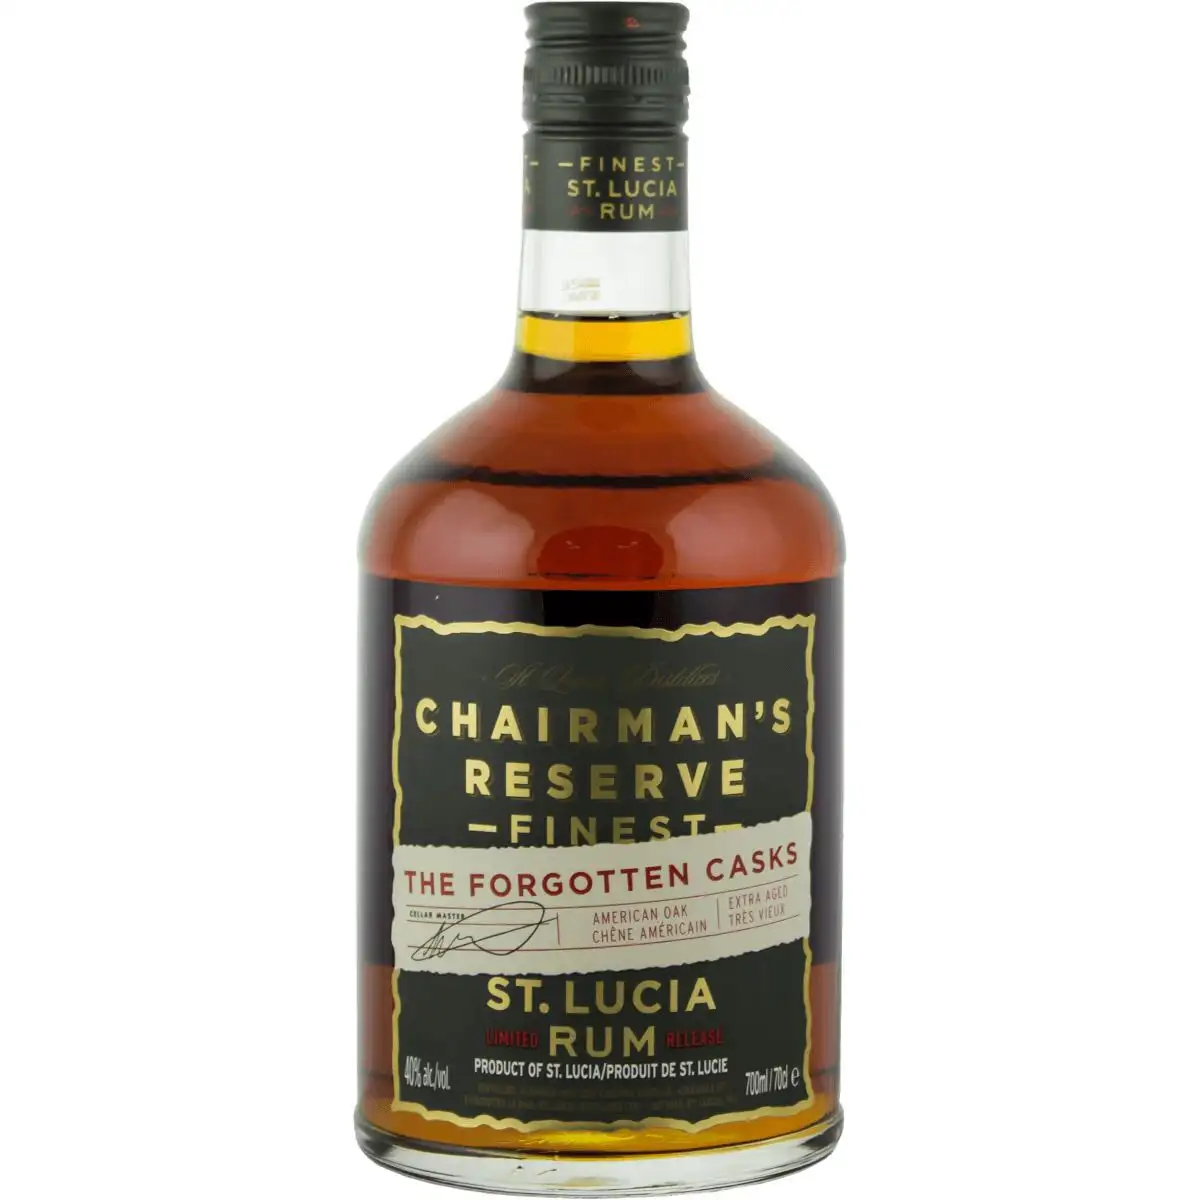 Image of the front of the bottle of the rum Chairman’s Reserve The Forgotten Casks